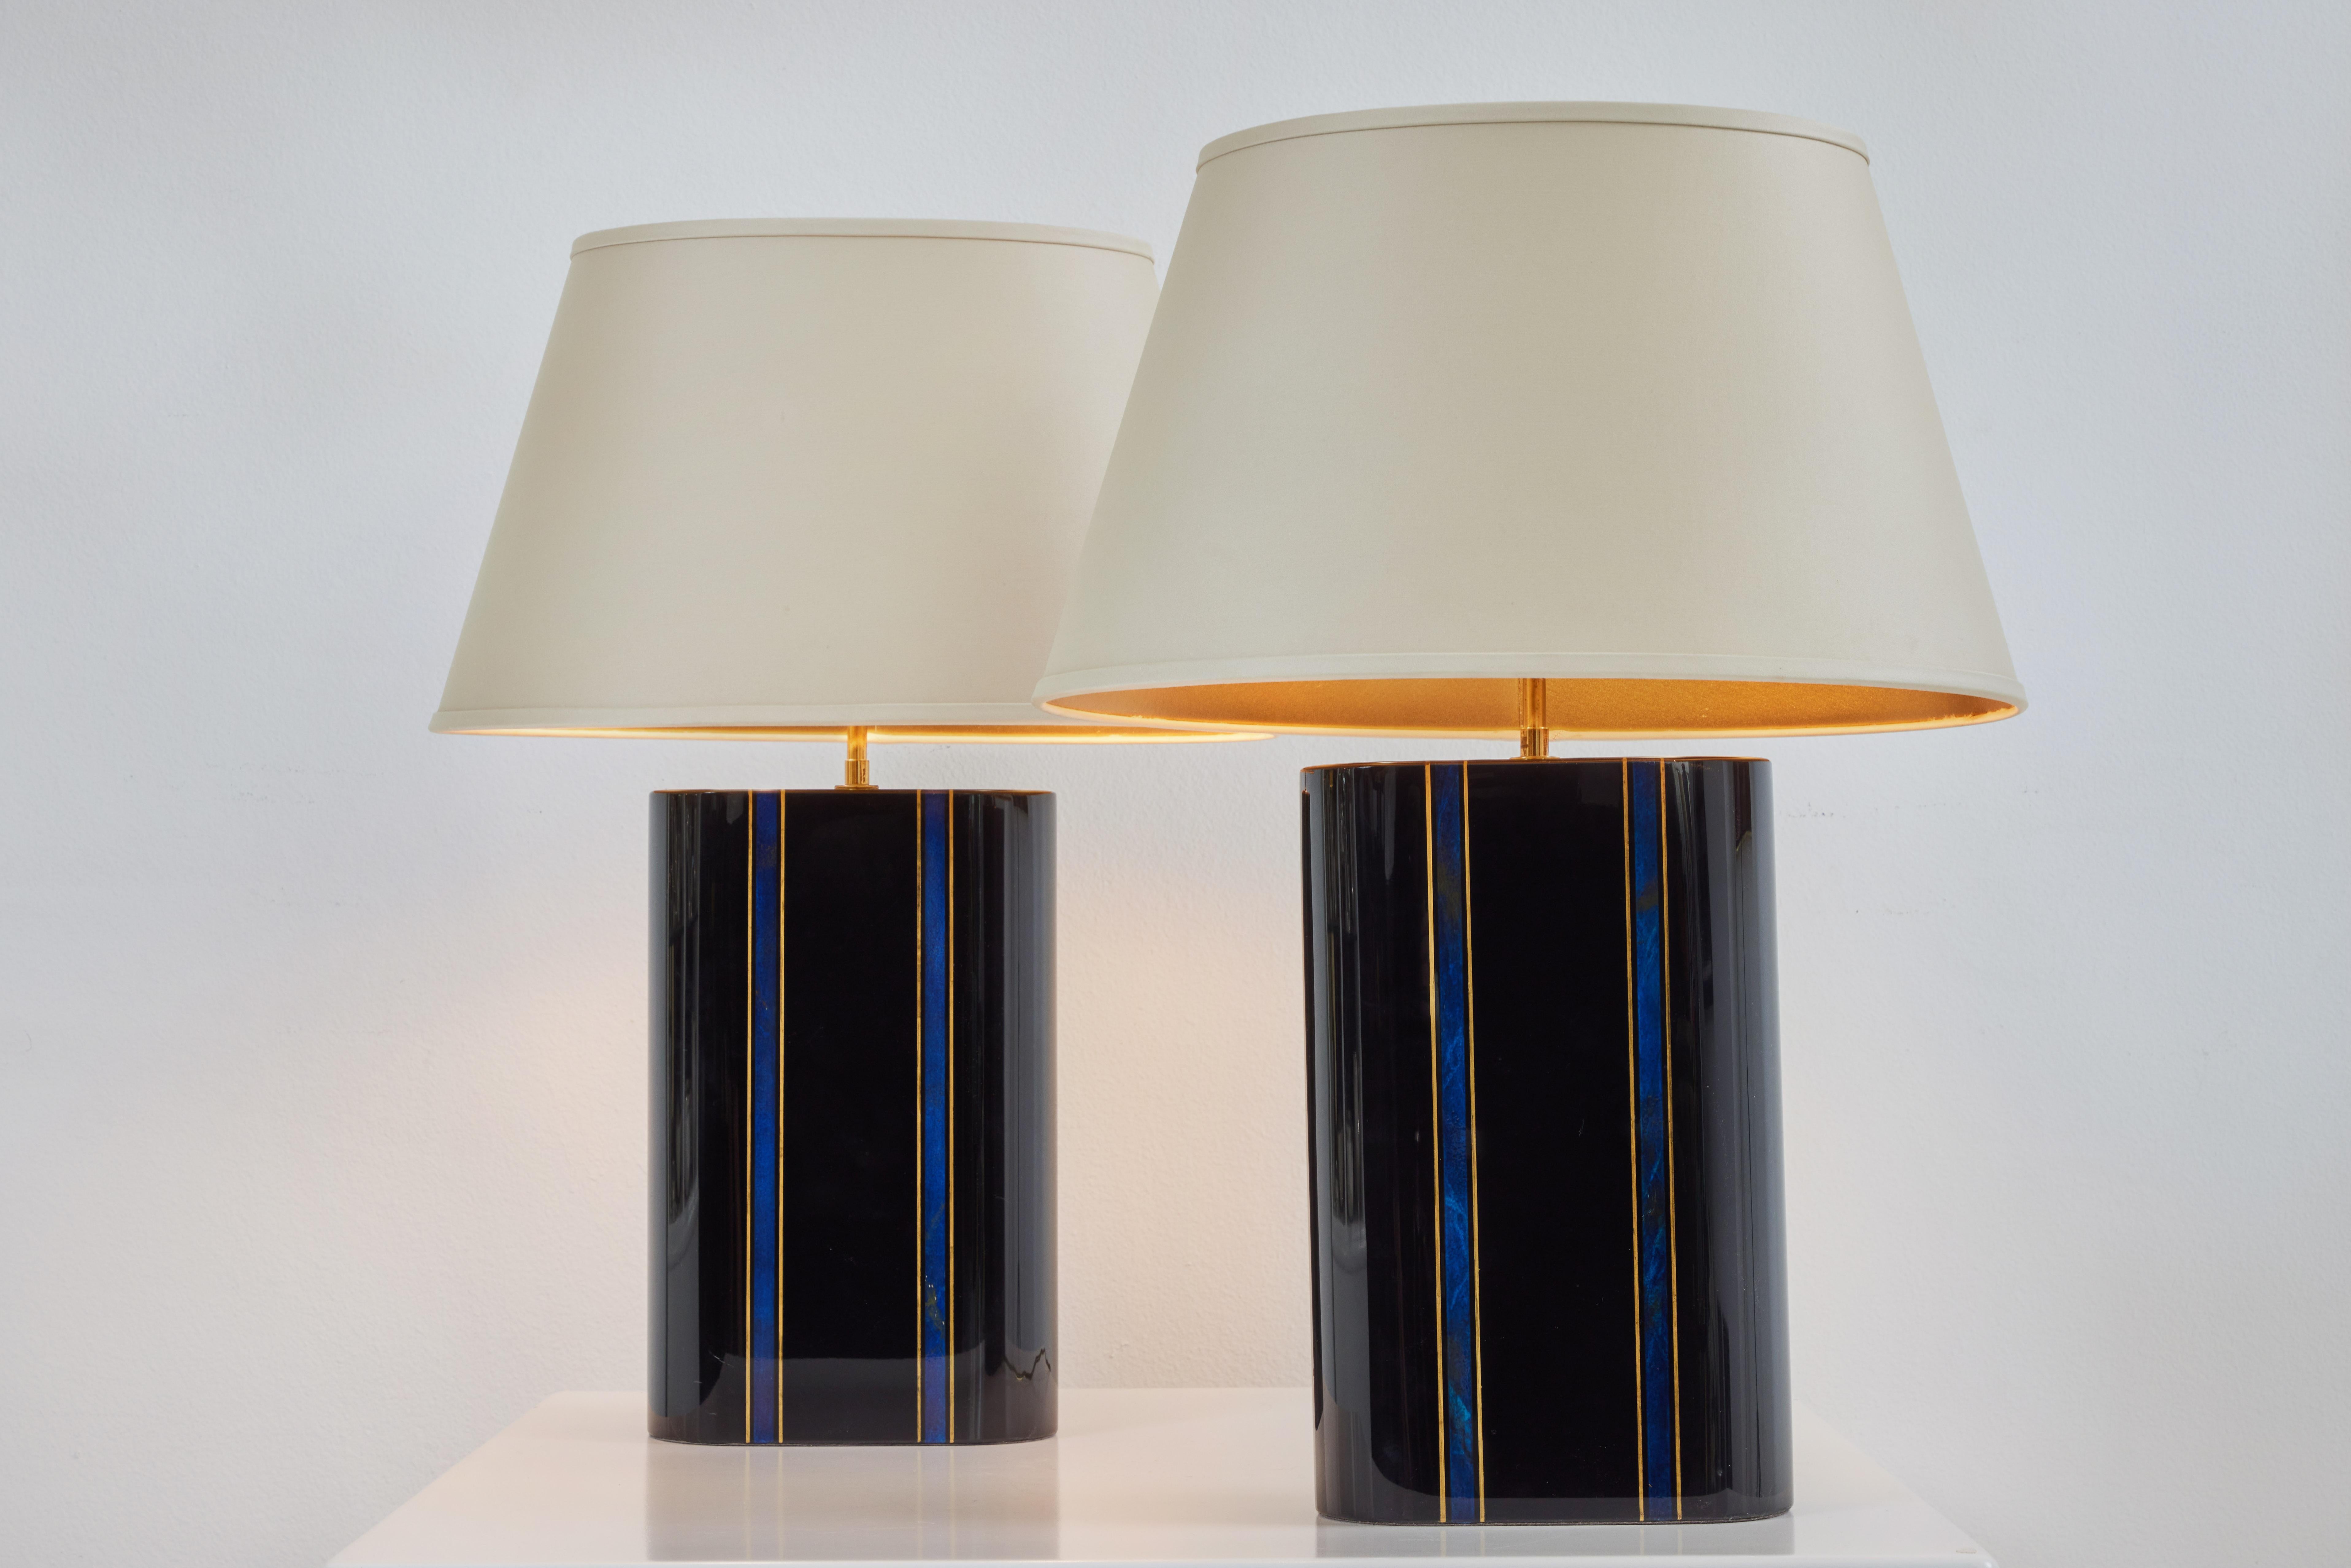 A beautiful pair of lamps a classic Karl Springer design. the lacquer bodies are in very fine condition and the faux details of lapis and gold is a wonderful detail. The shades are original to the lamps and are in great condition finished in a cream